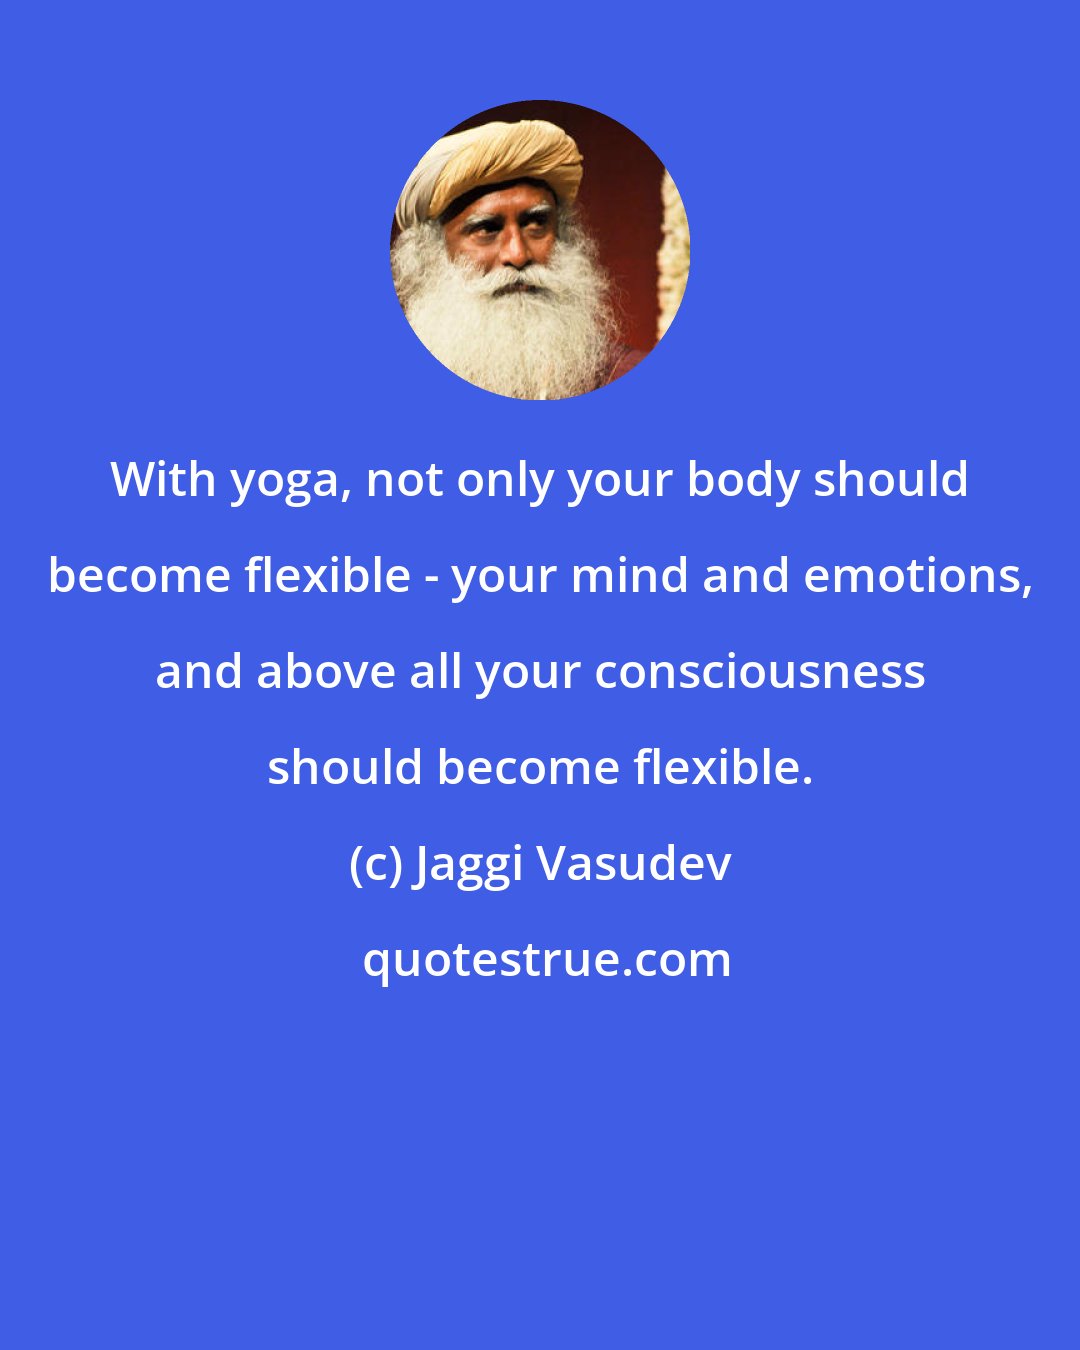 Jaggi Vasudev: With yoga, not only your body should become flexible - your mind and emotions, and above all your consciousness should become flexible.